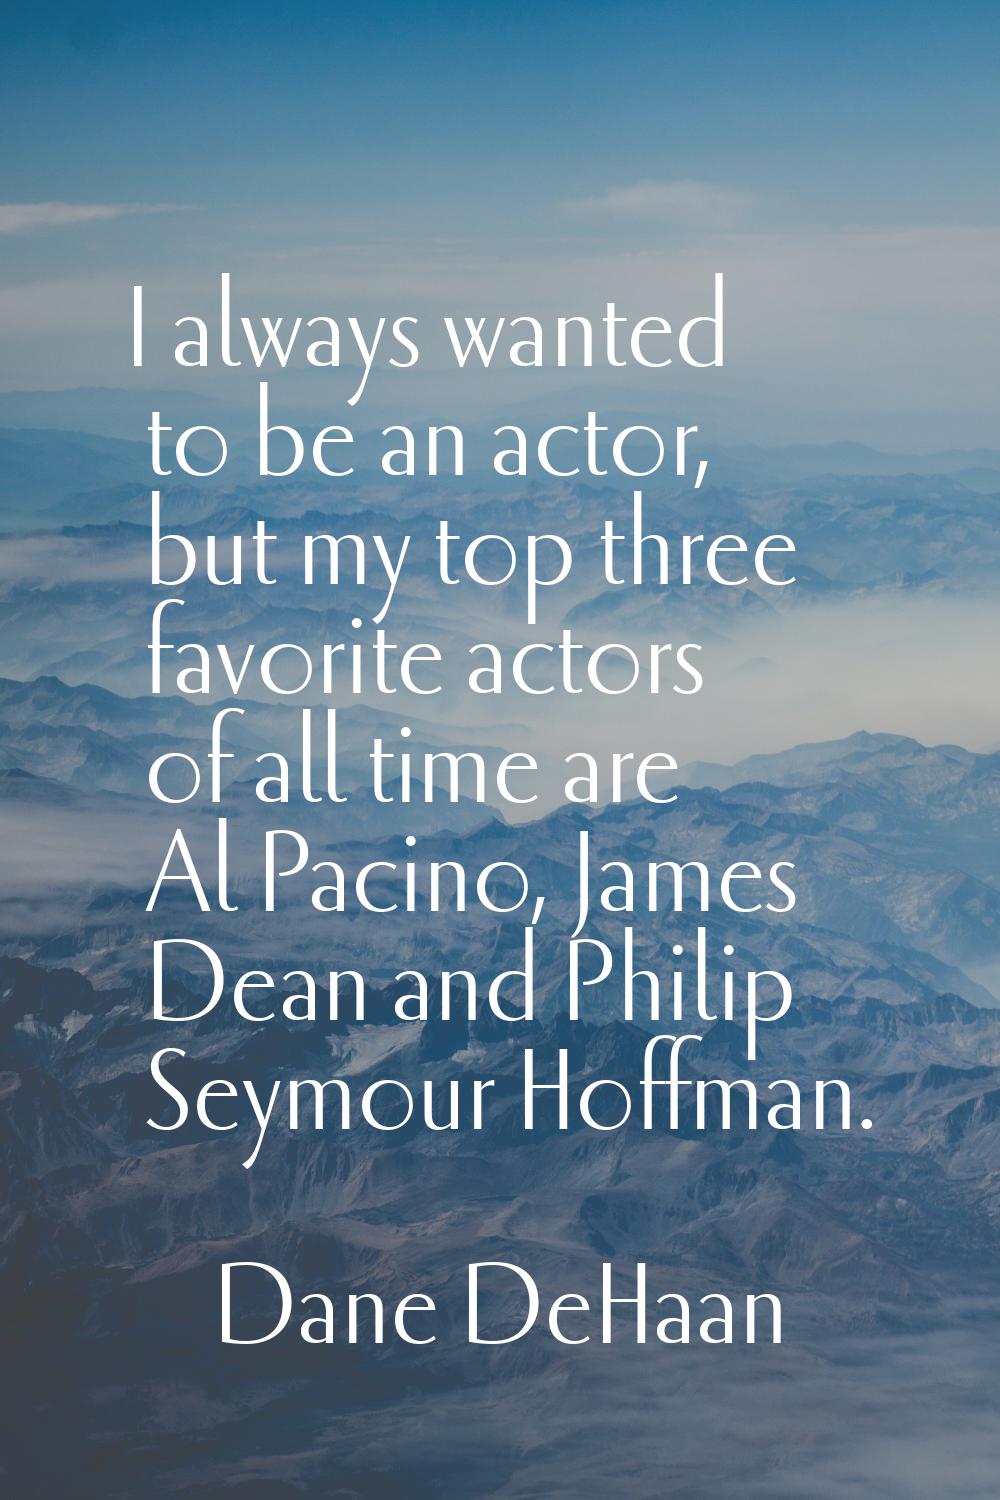 I always wanted to be an actor, but my top three favorite actors of all time are Al Pacino, James D